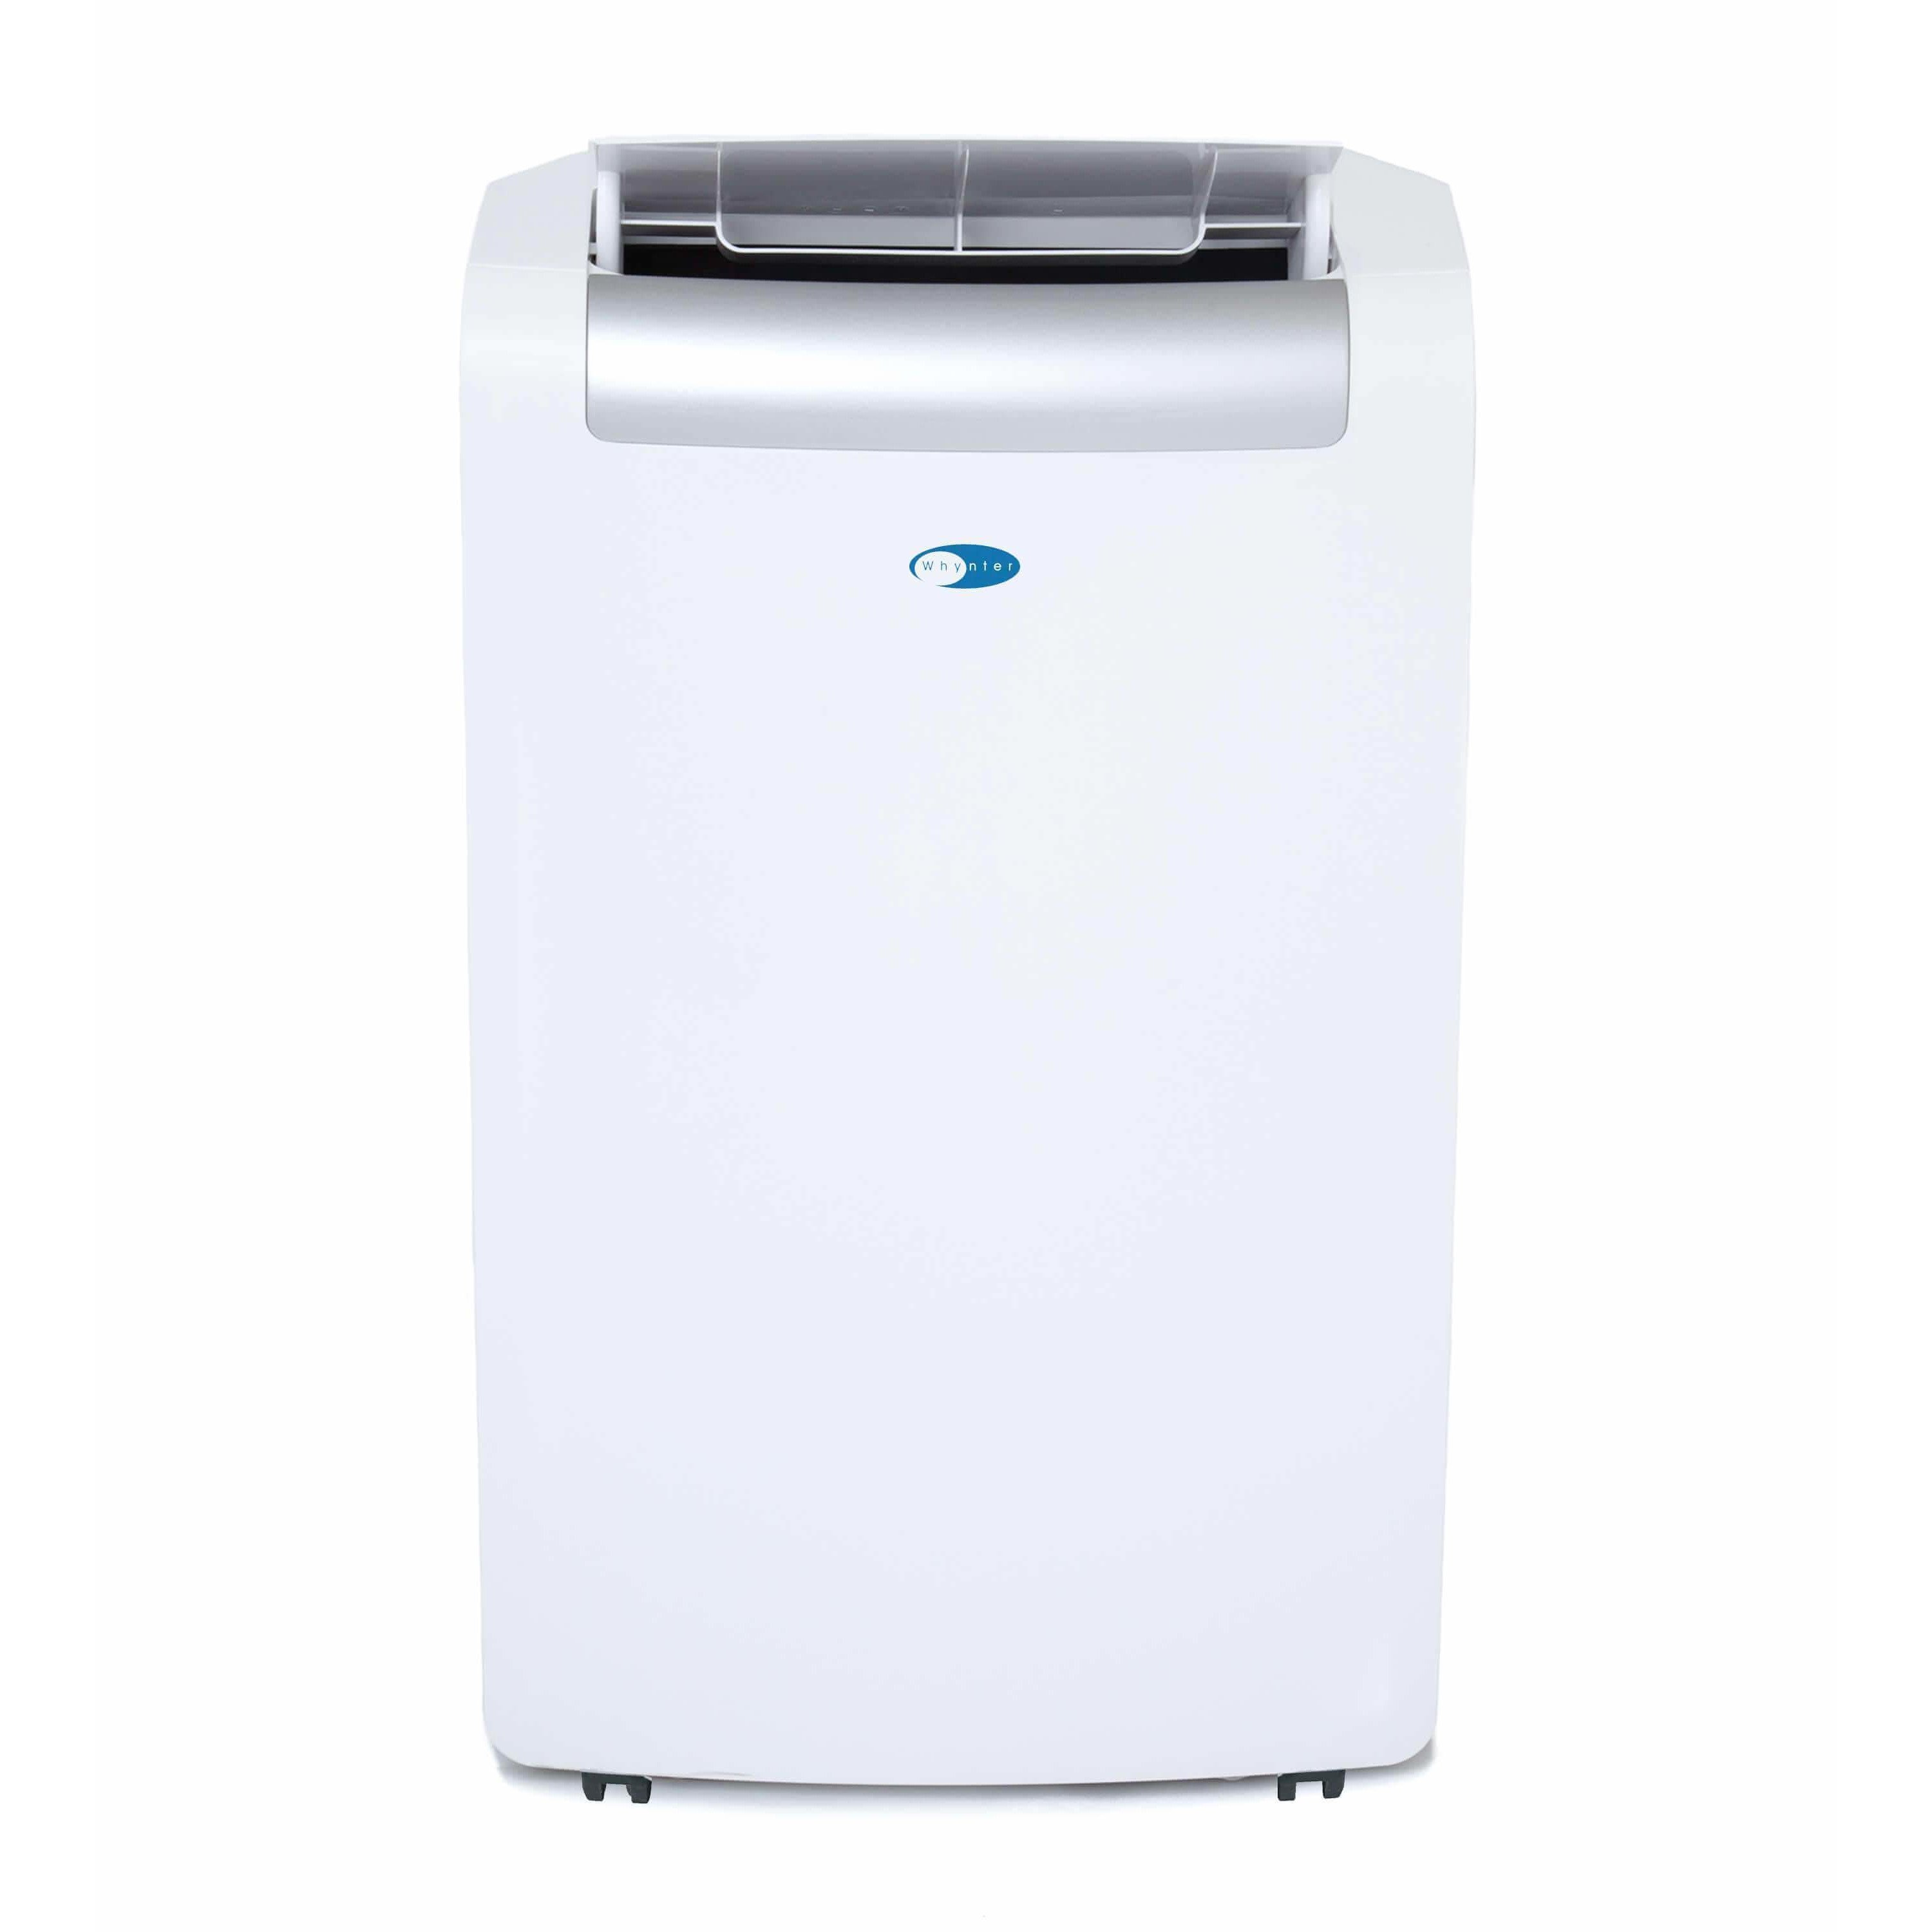 Whynter 14,000 BTU Portable Air Conditioner and Heater with 3M Silvershield Filter Plus Autopump ARC-148MHP Wine Coolers Empire